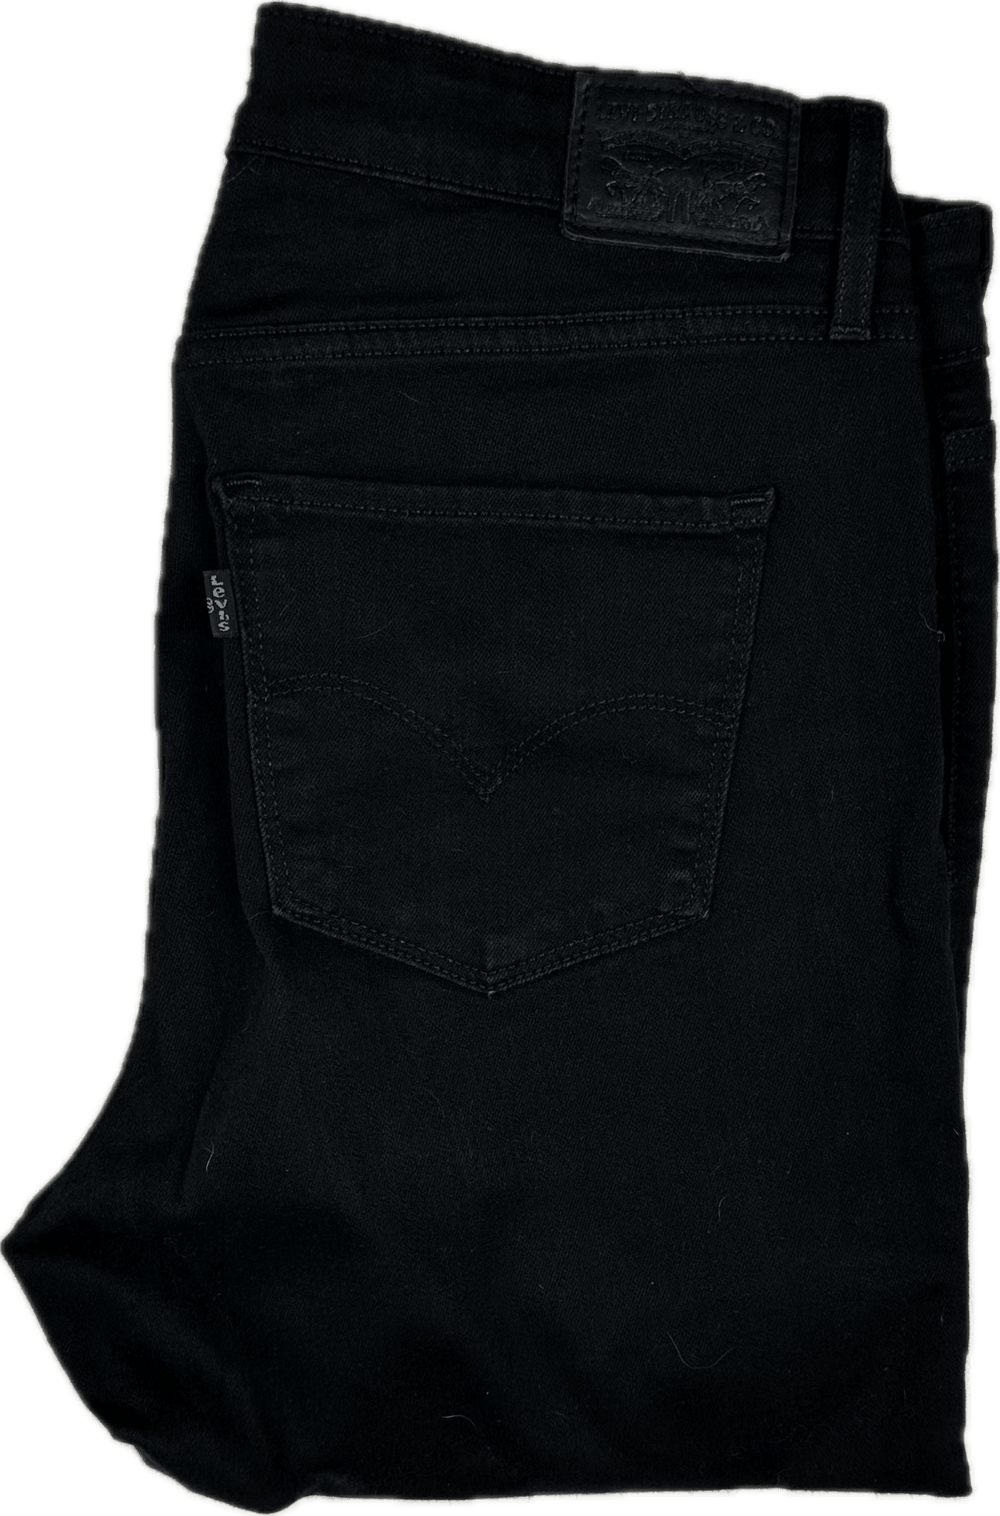 Levis 721 Ladies ' The High Rise Skinny' Black Jeans - Size 31 - Jean Pool